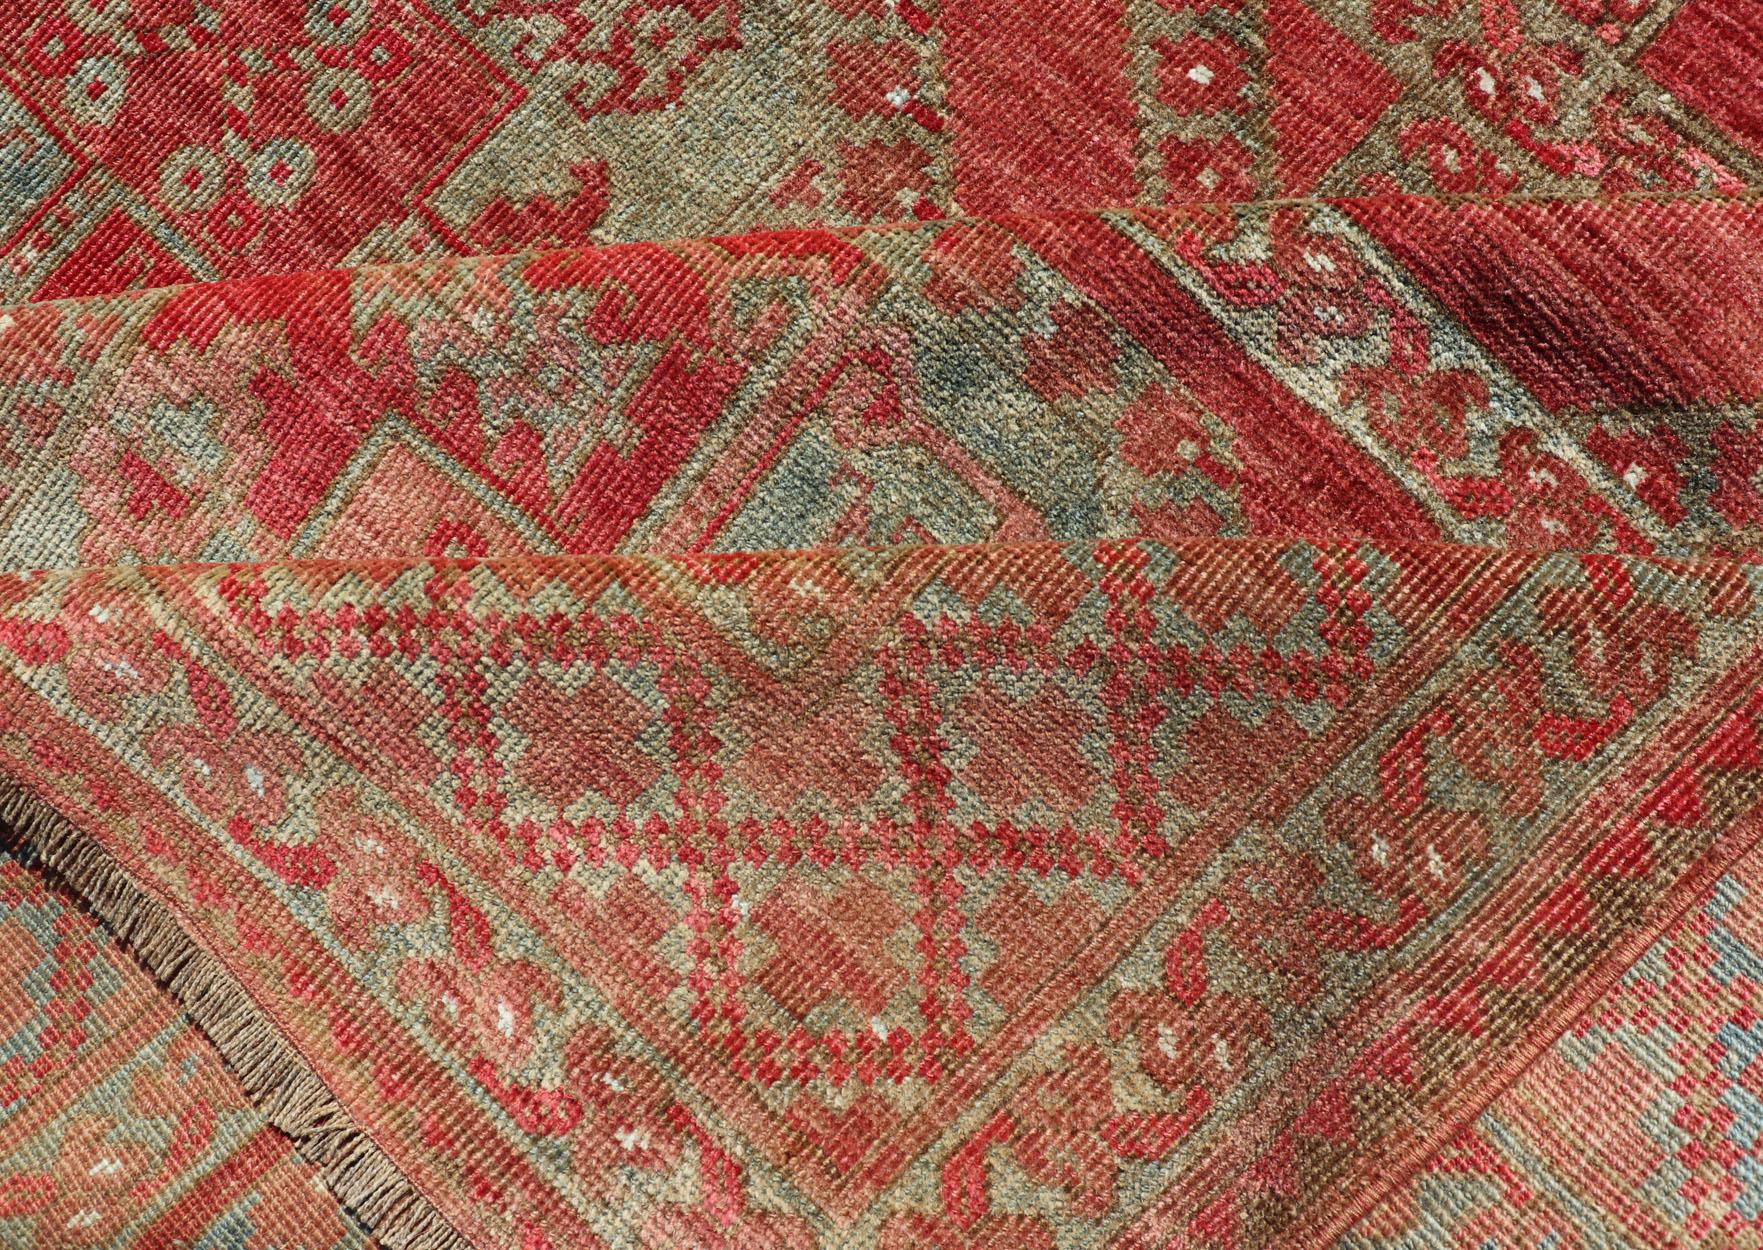 Hand-Knotted Wool Ersari Rug in Wool with Gul Design in Shades of Red & Green 5